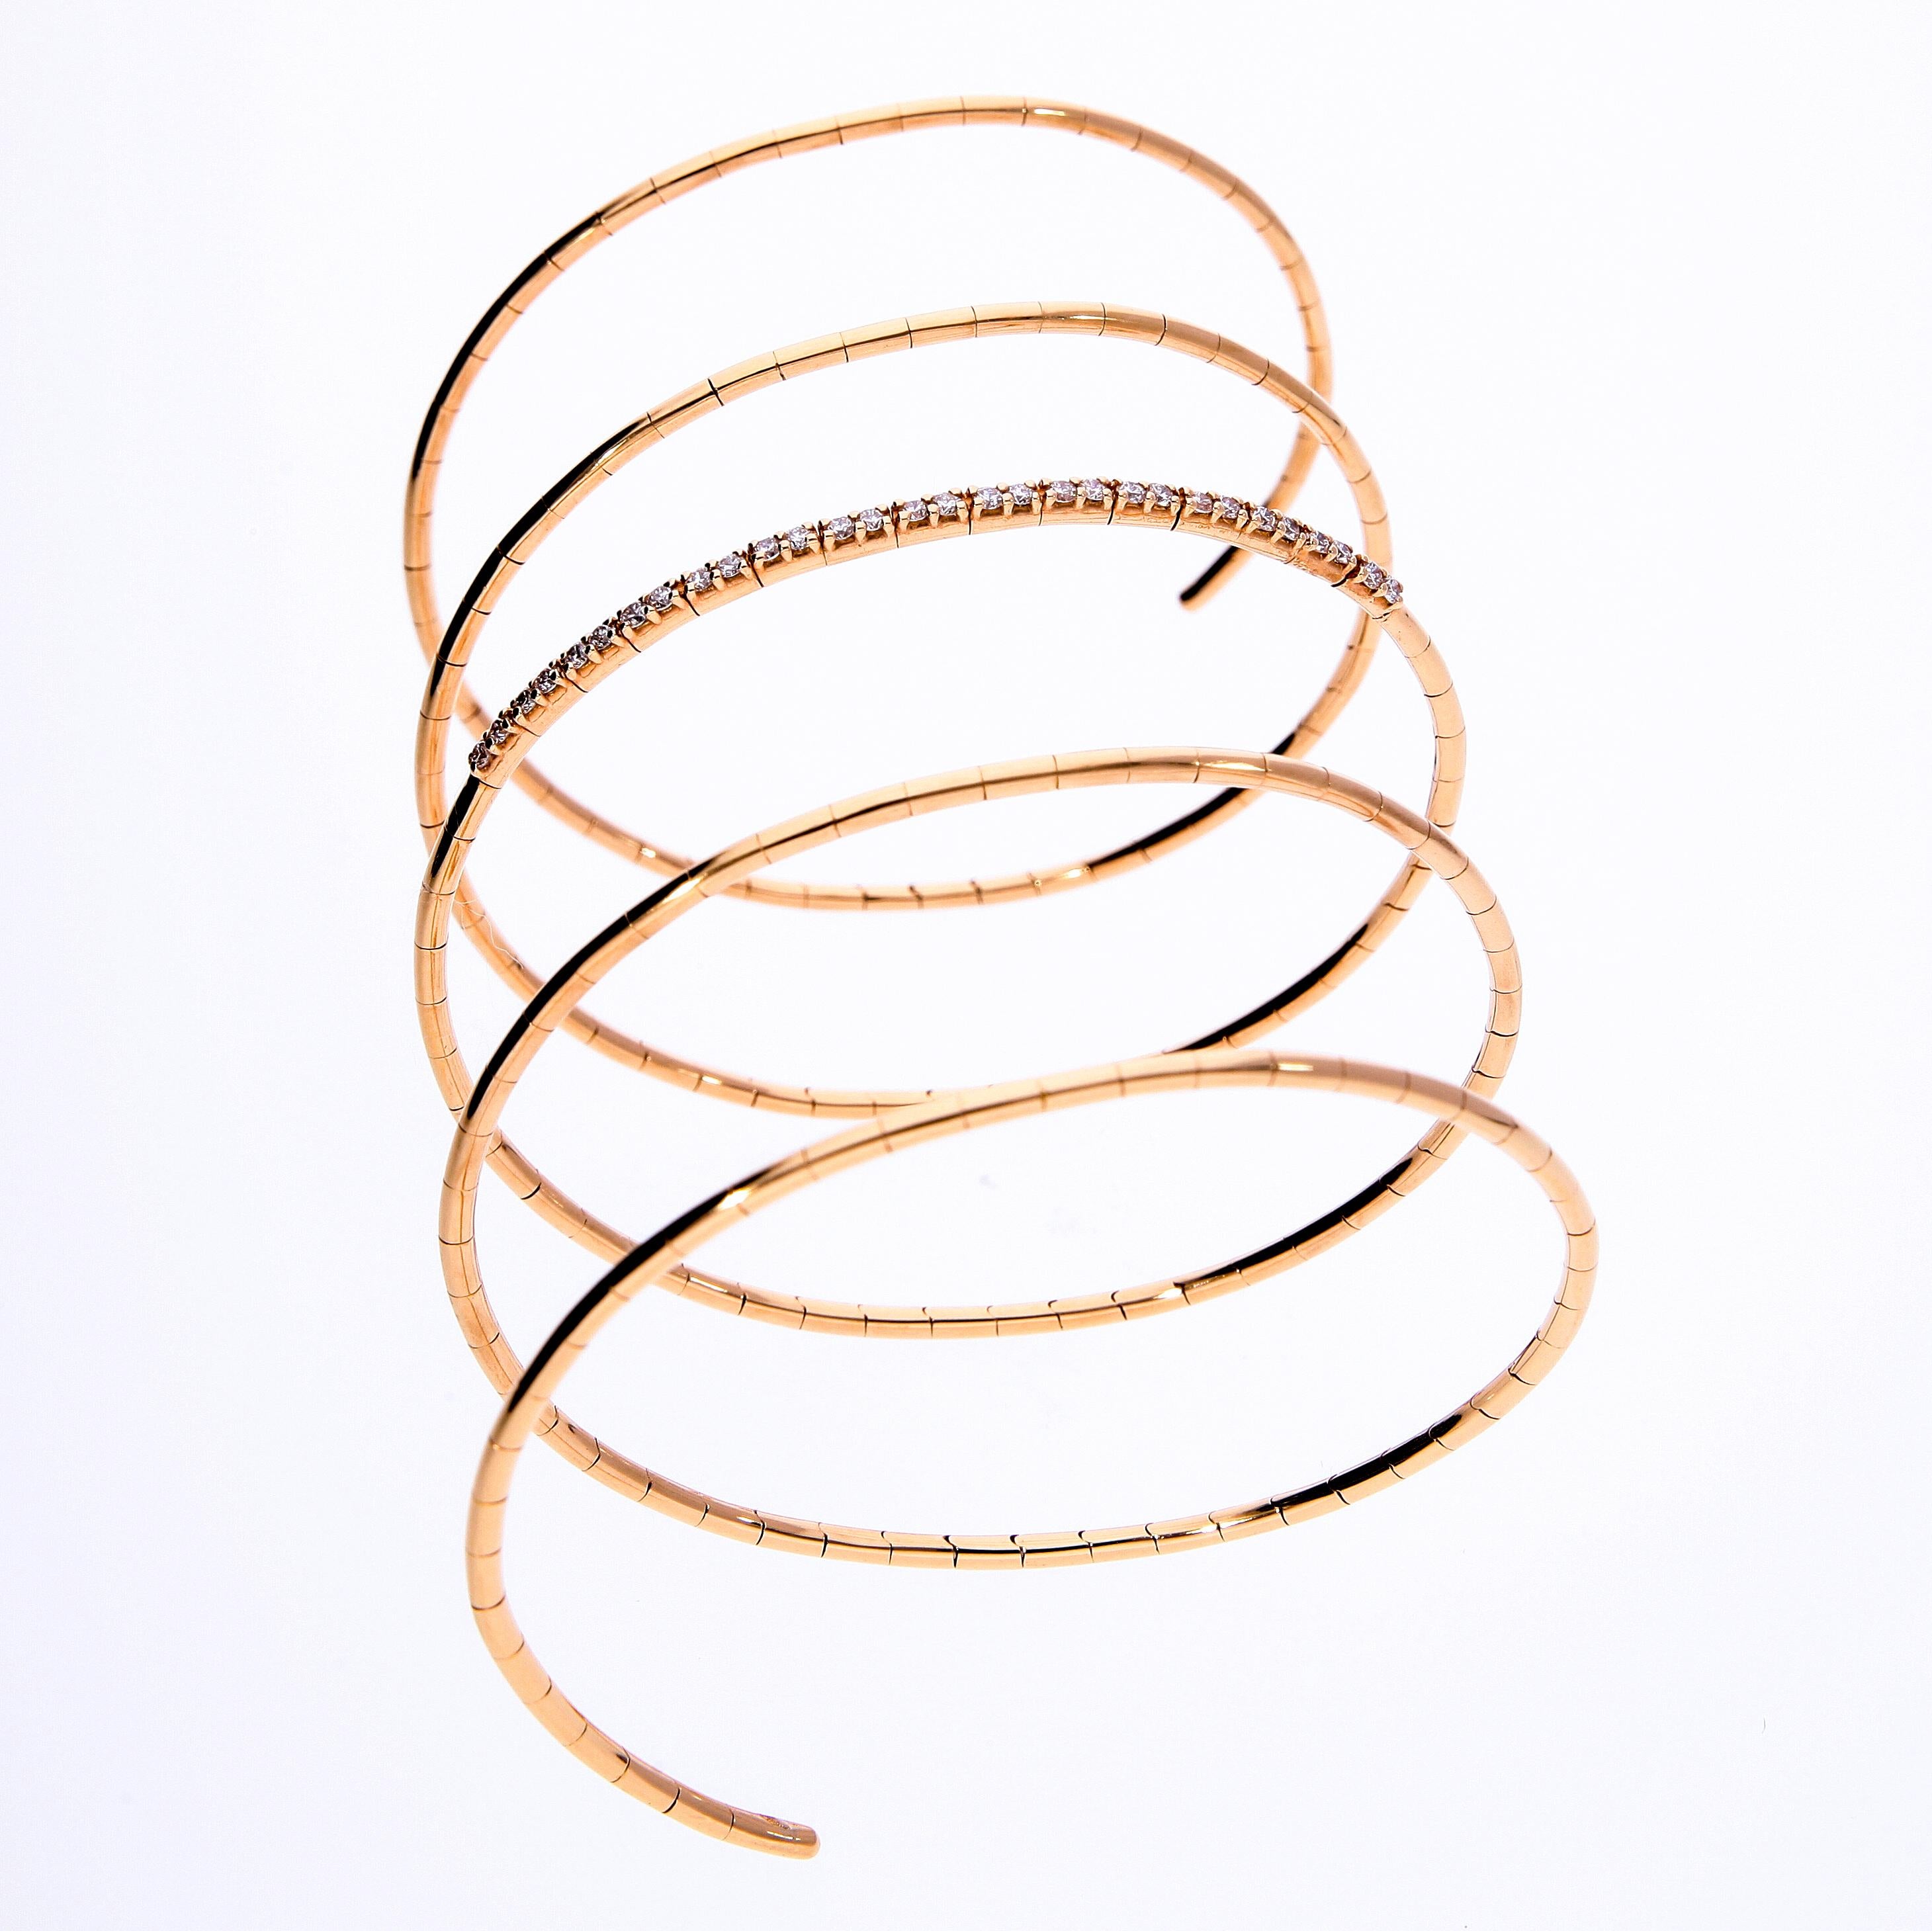 0.54 ct of Diamonds on 18 Kt Rose Gold Elastic Spiral Bracelet Made in Italy For Sale 3